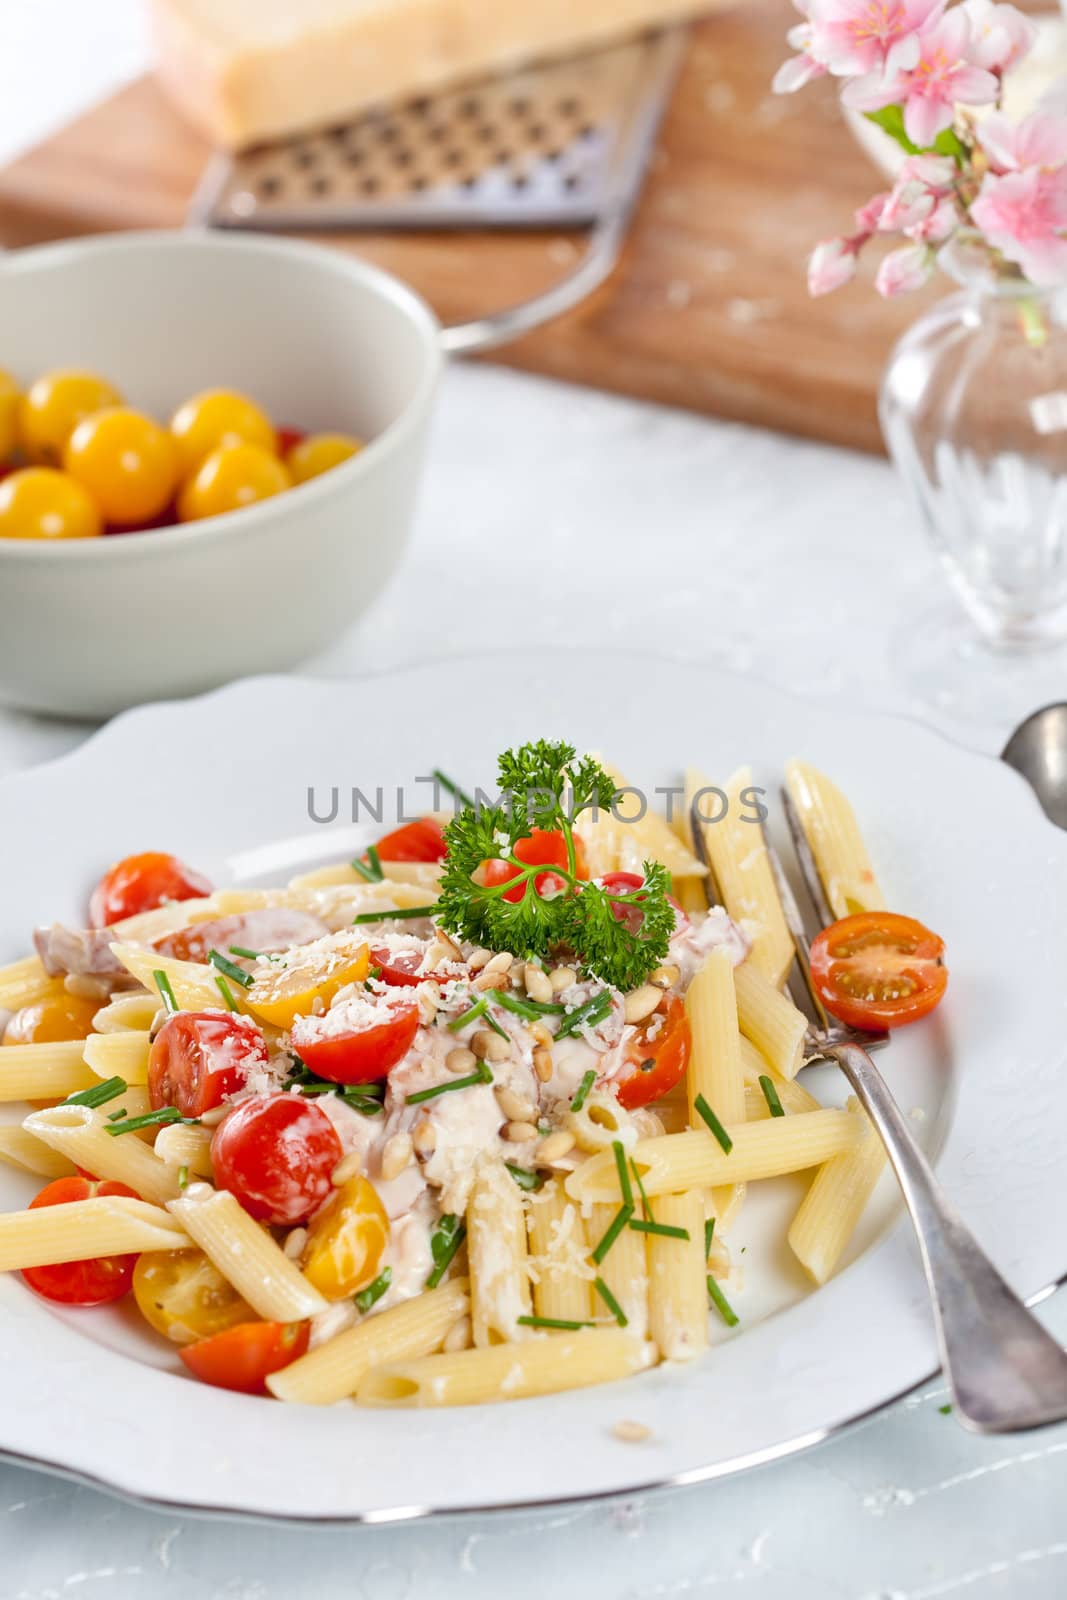 Delicious and fresh pasta with tomatoes, chives and parsley